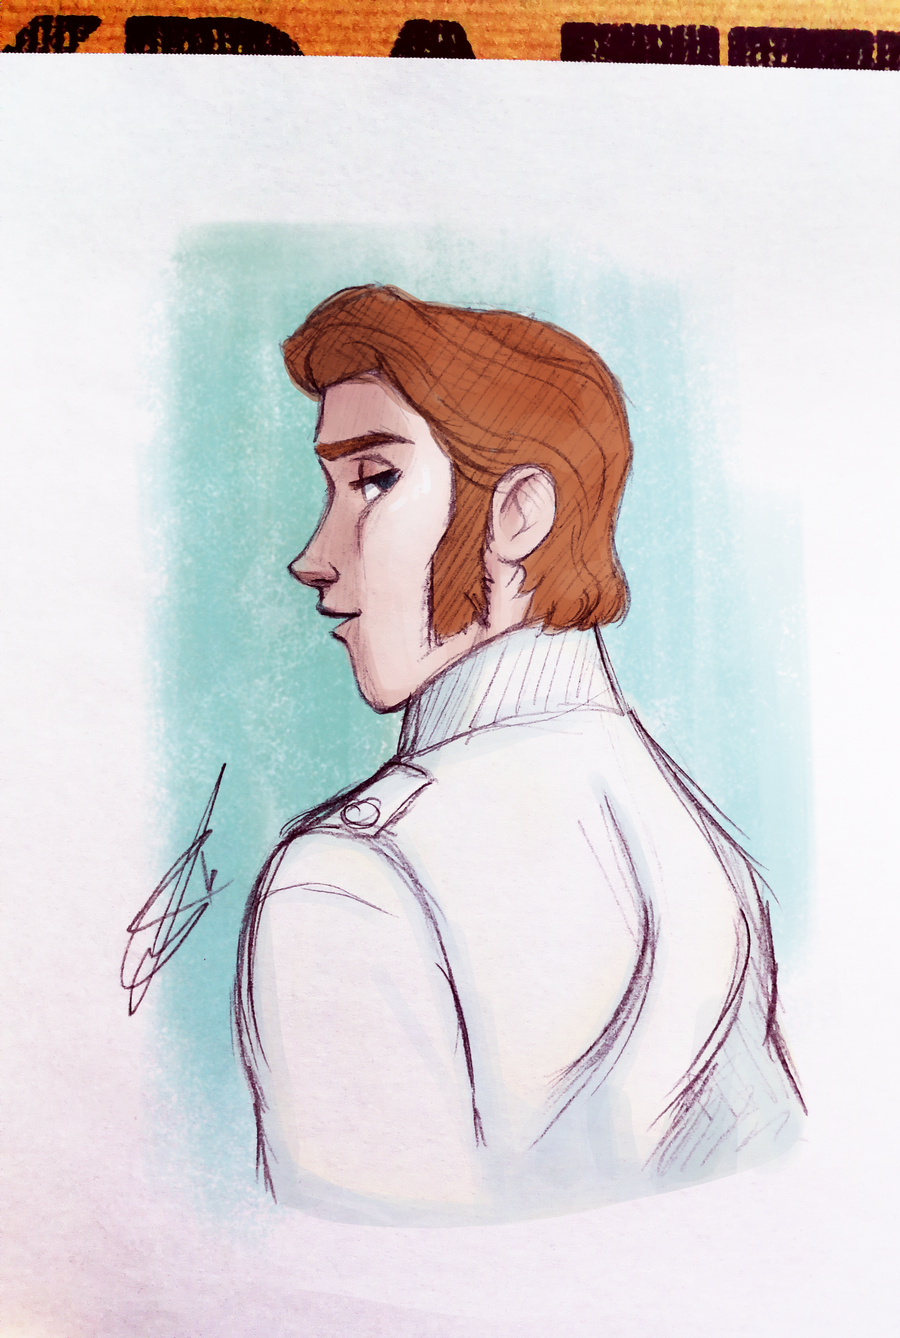 How to Draw Prince Hans, Frozen